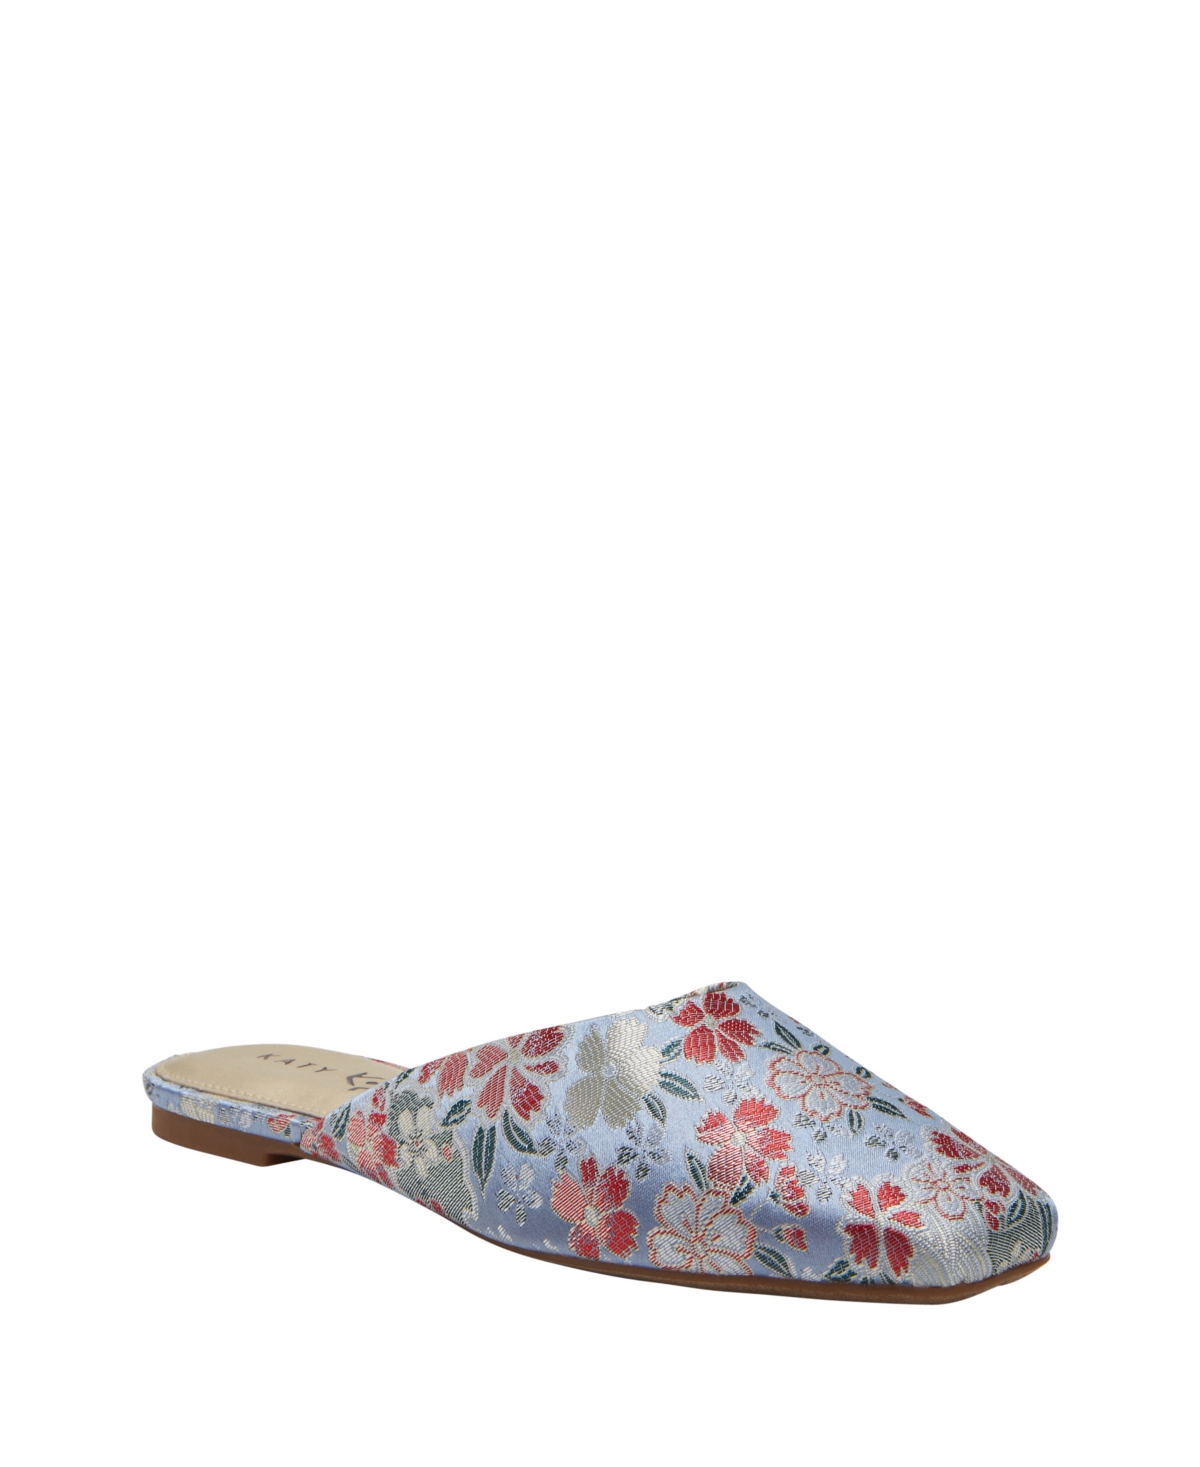 Katy Perry Women's Evie Square Toe Mules In Blue Multi